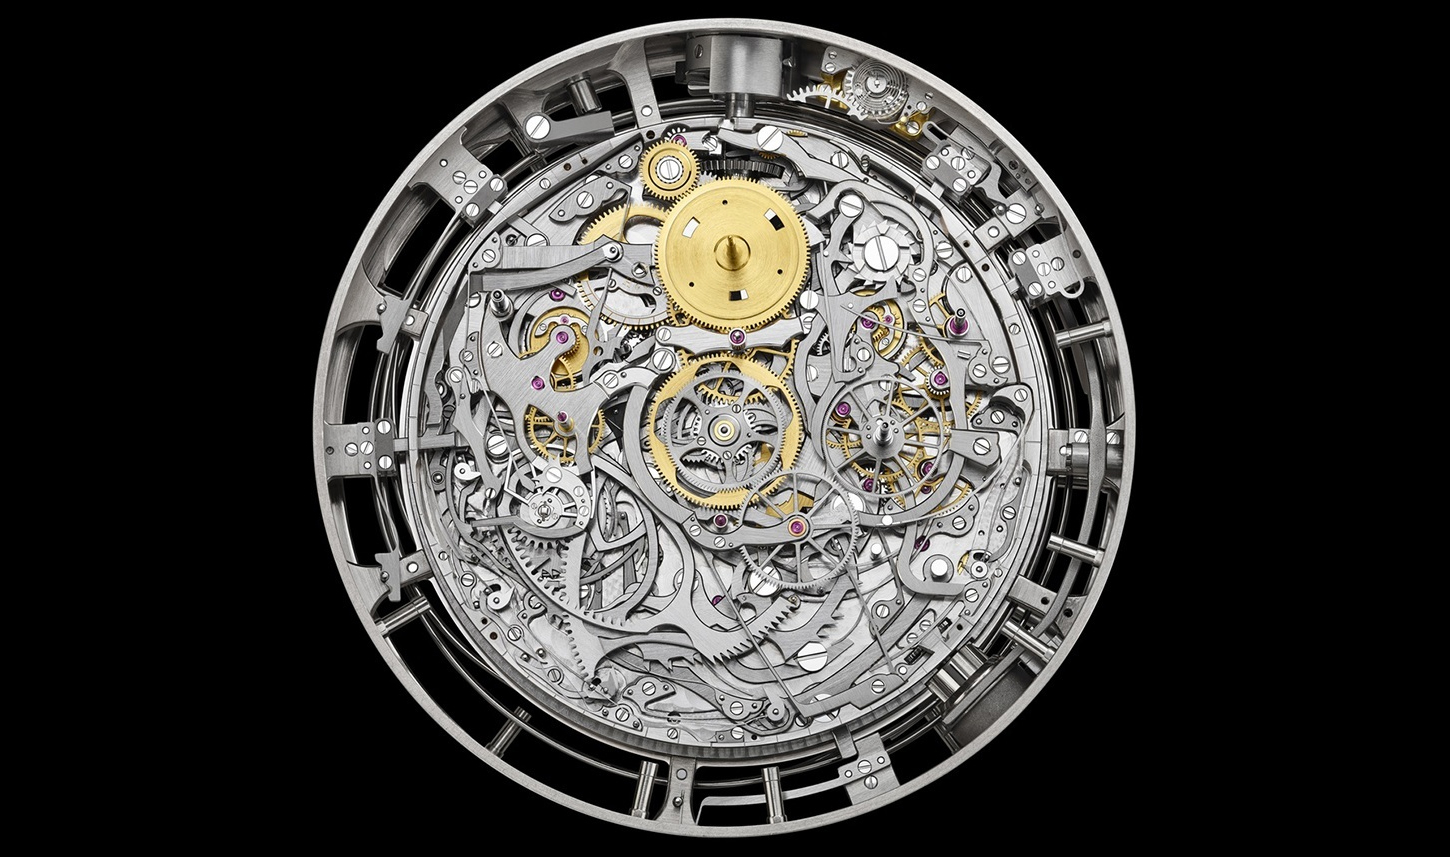 This Is The Most Complicated Pocket Watch Ever Made